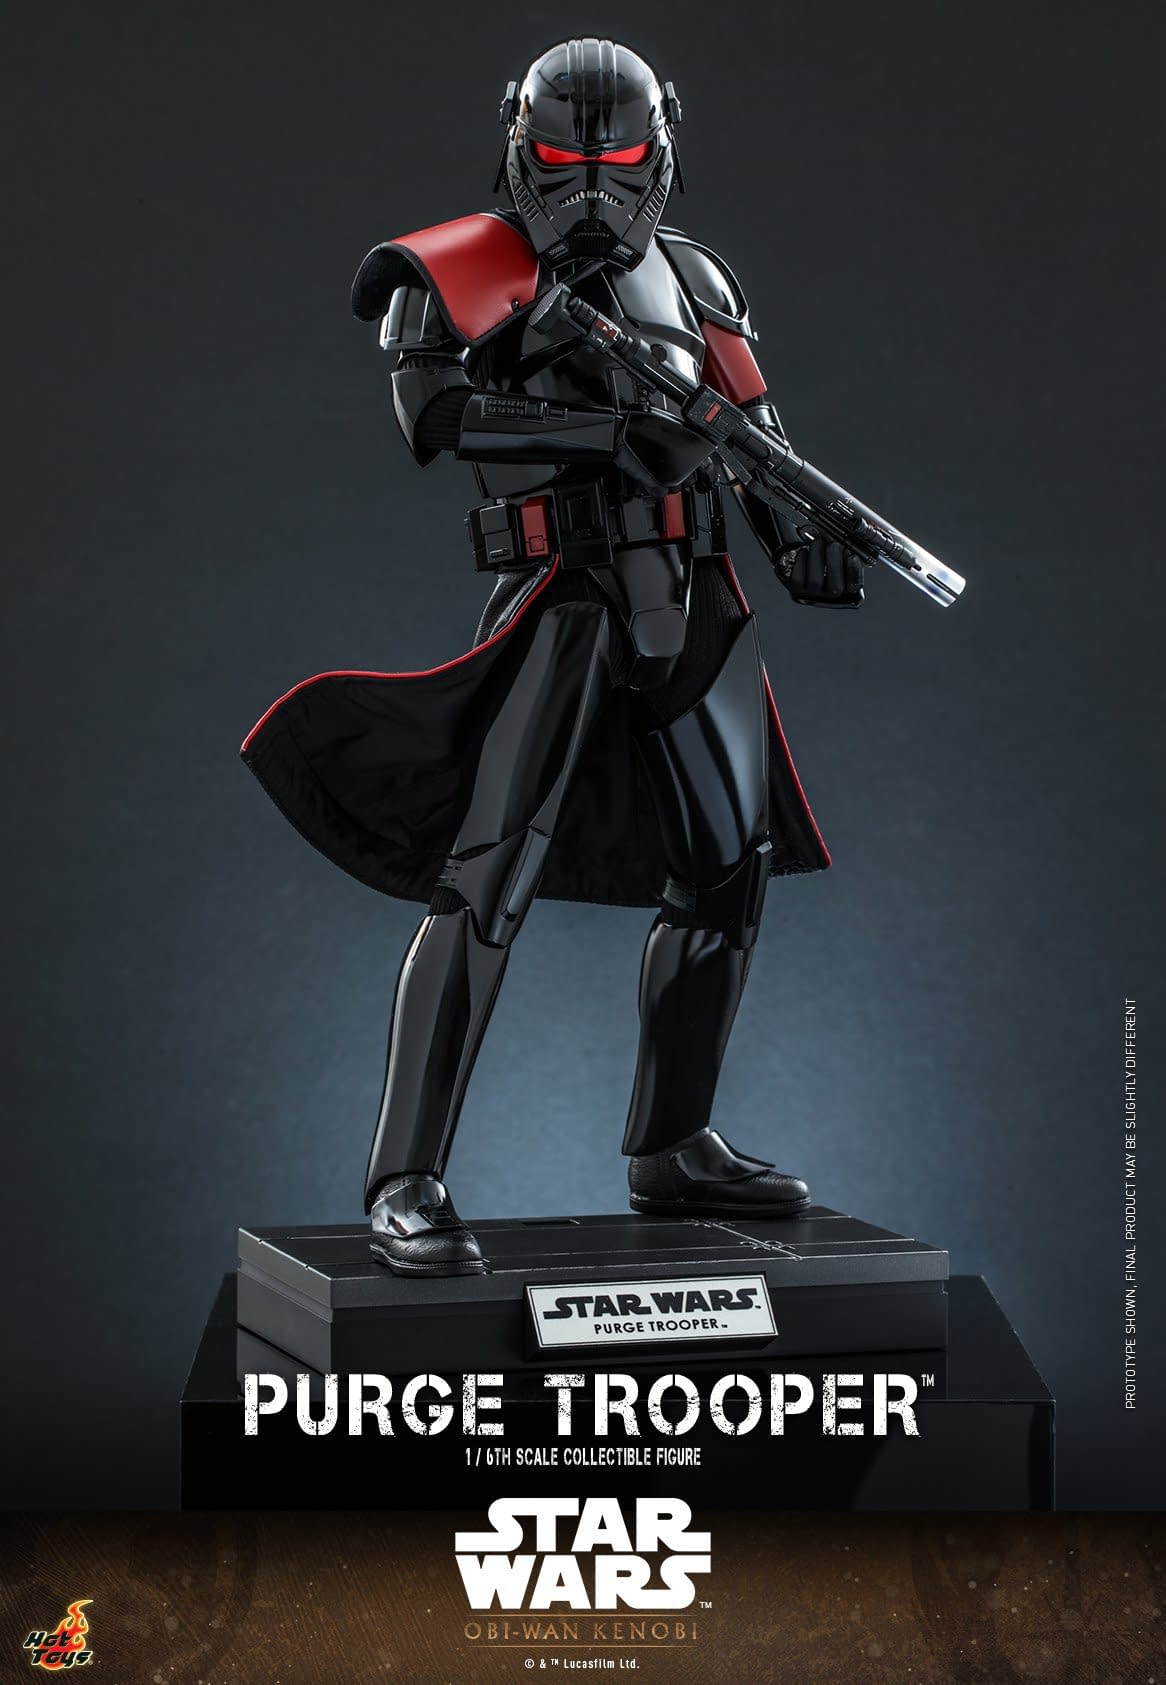 Star Wars Purge Trooper Comes to Life with New Hot Toys 1/6 Figure